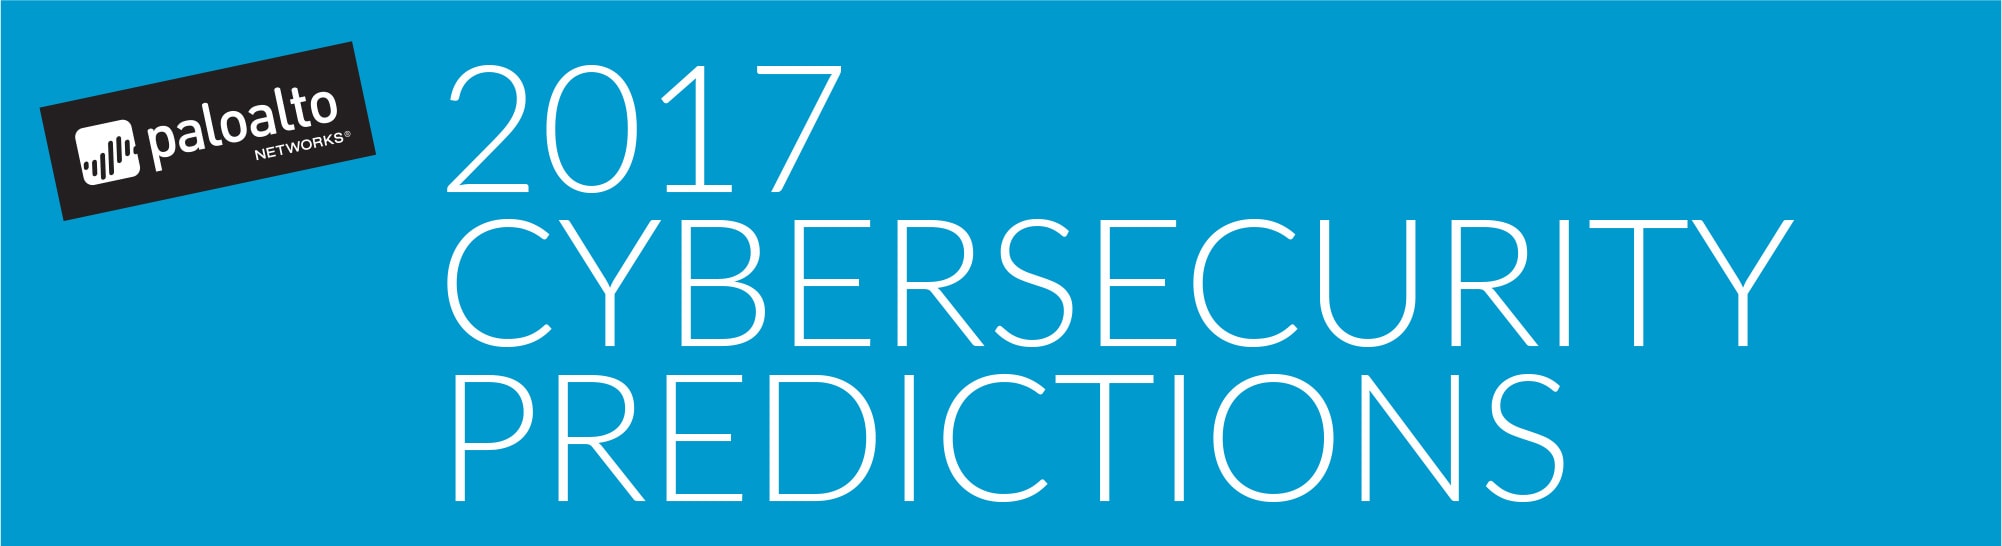 2017 Cybersecurity Predictions: Sure Things and Long Shots